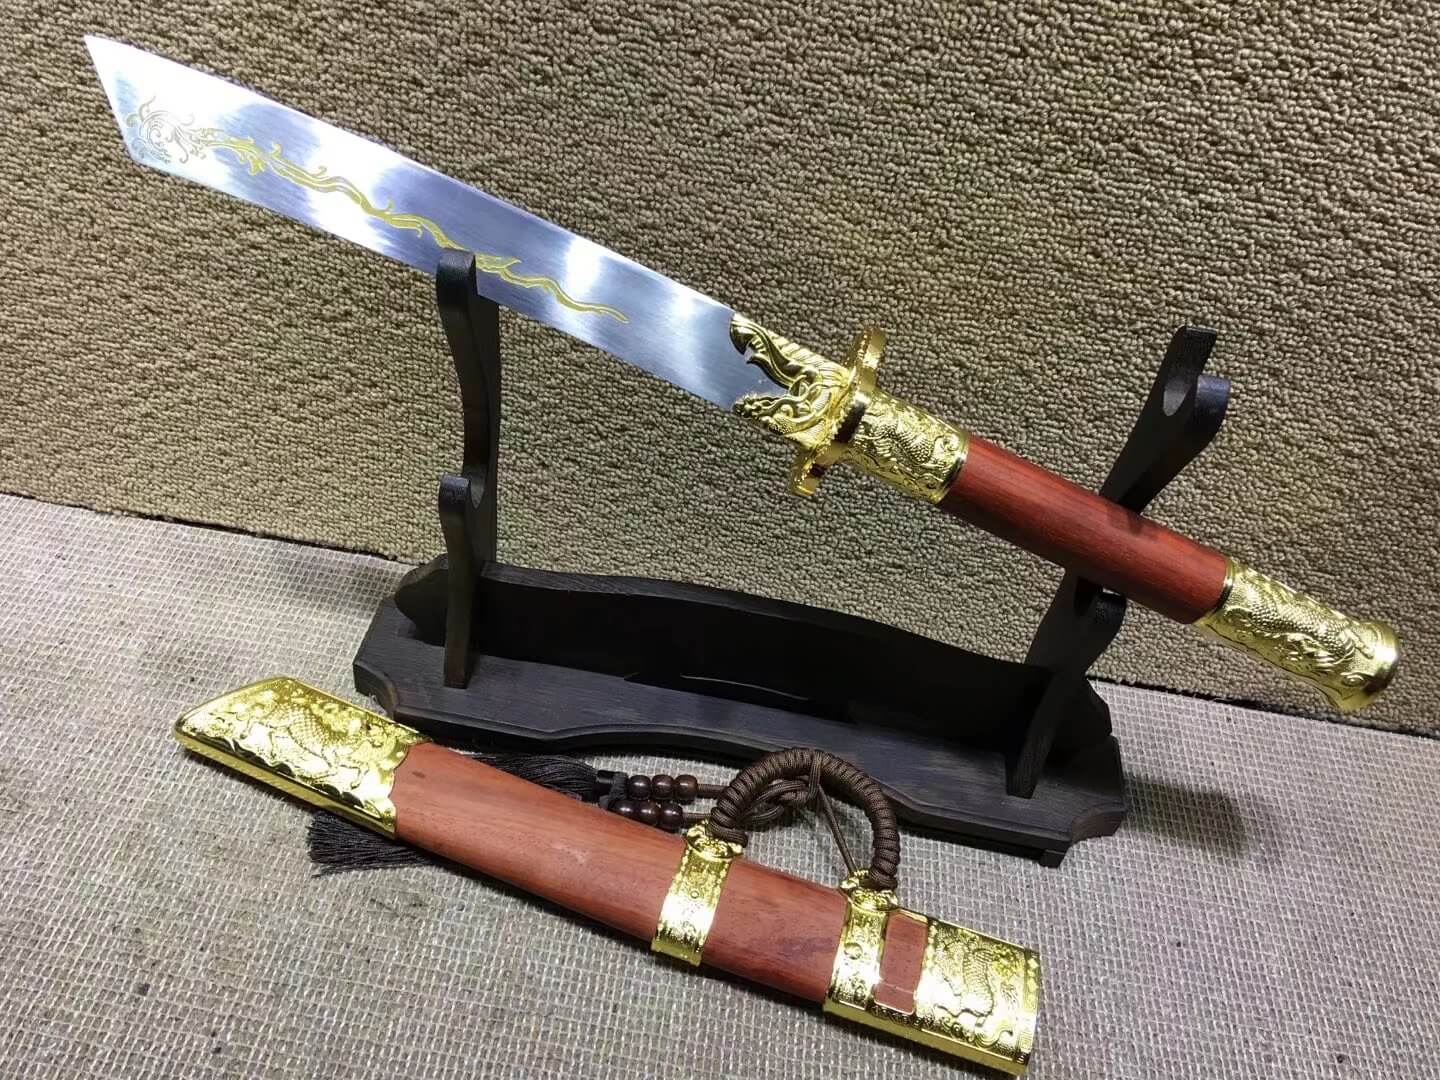 Kangxi dagger,High carbon steel,Red scabbard,Alloy fitted,Length 27" - Chinese sword shop